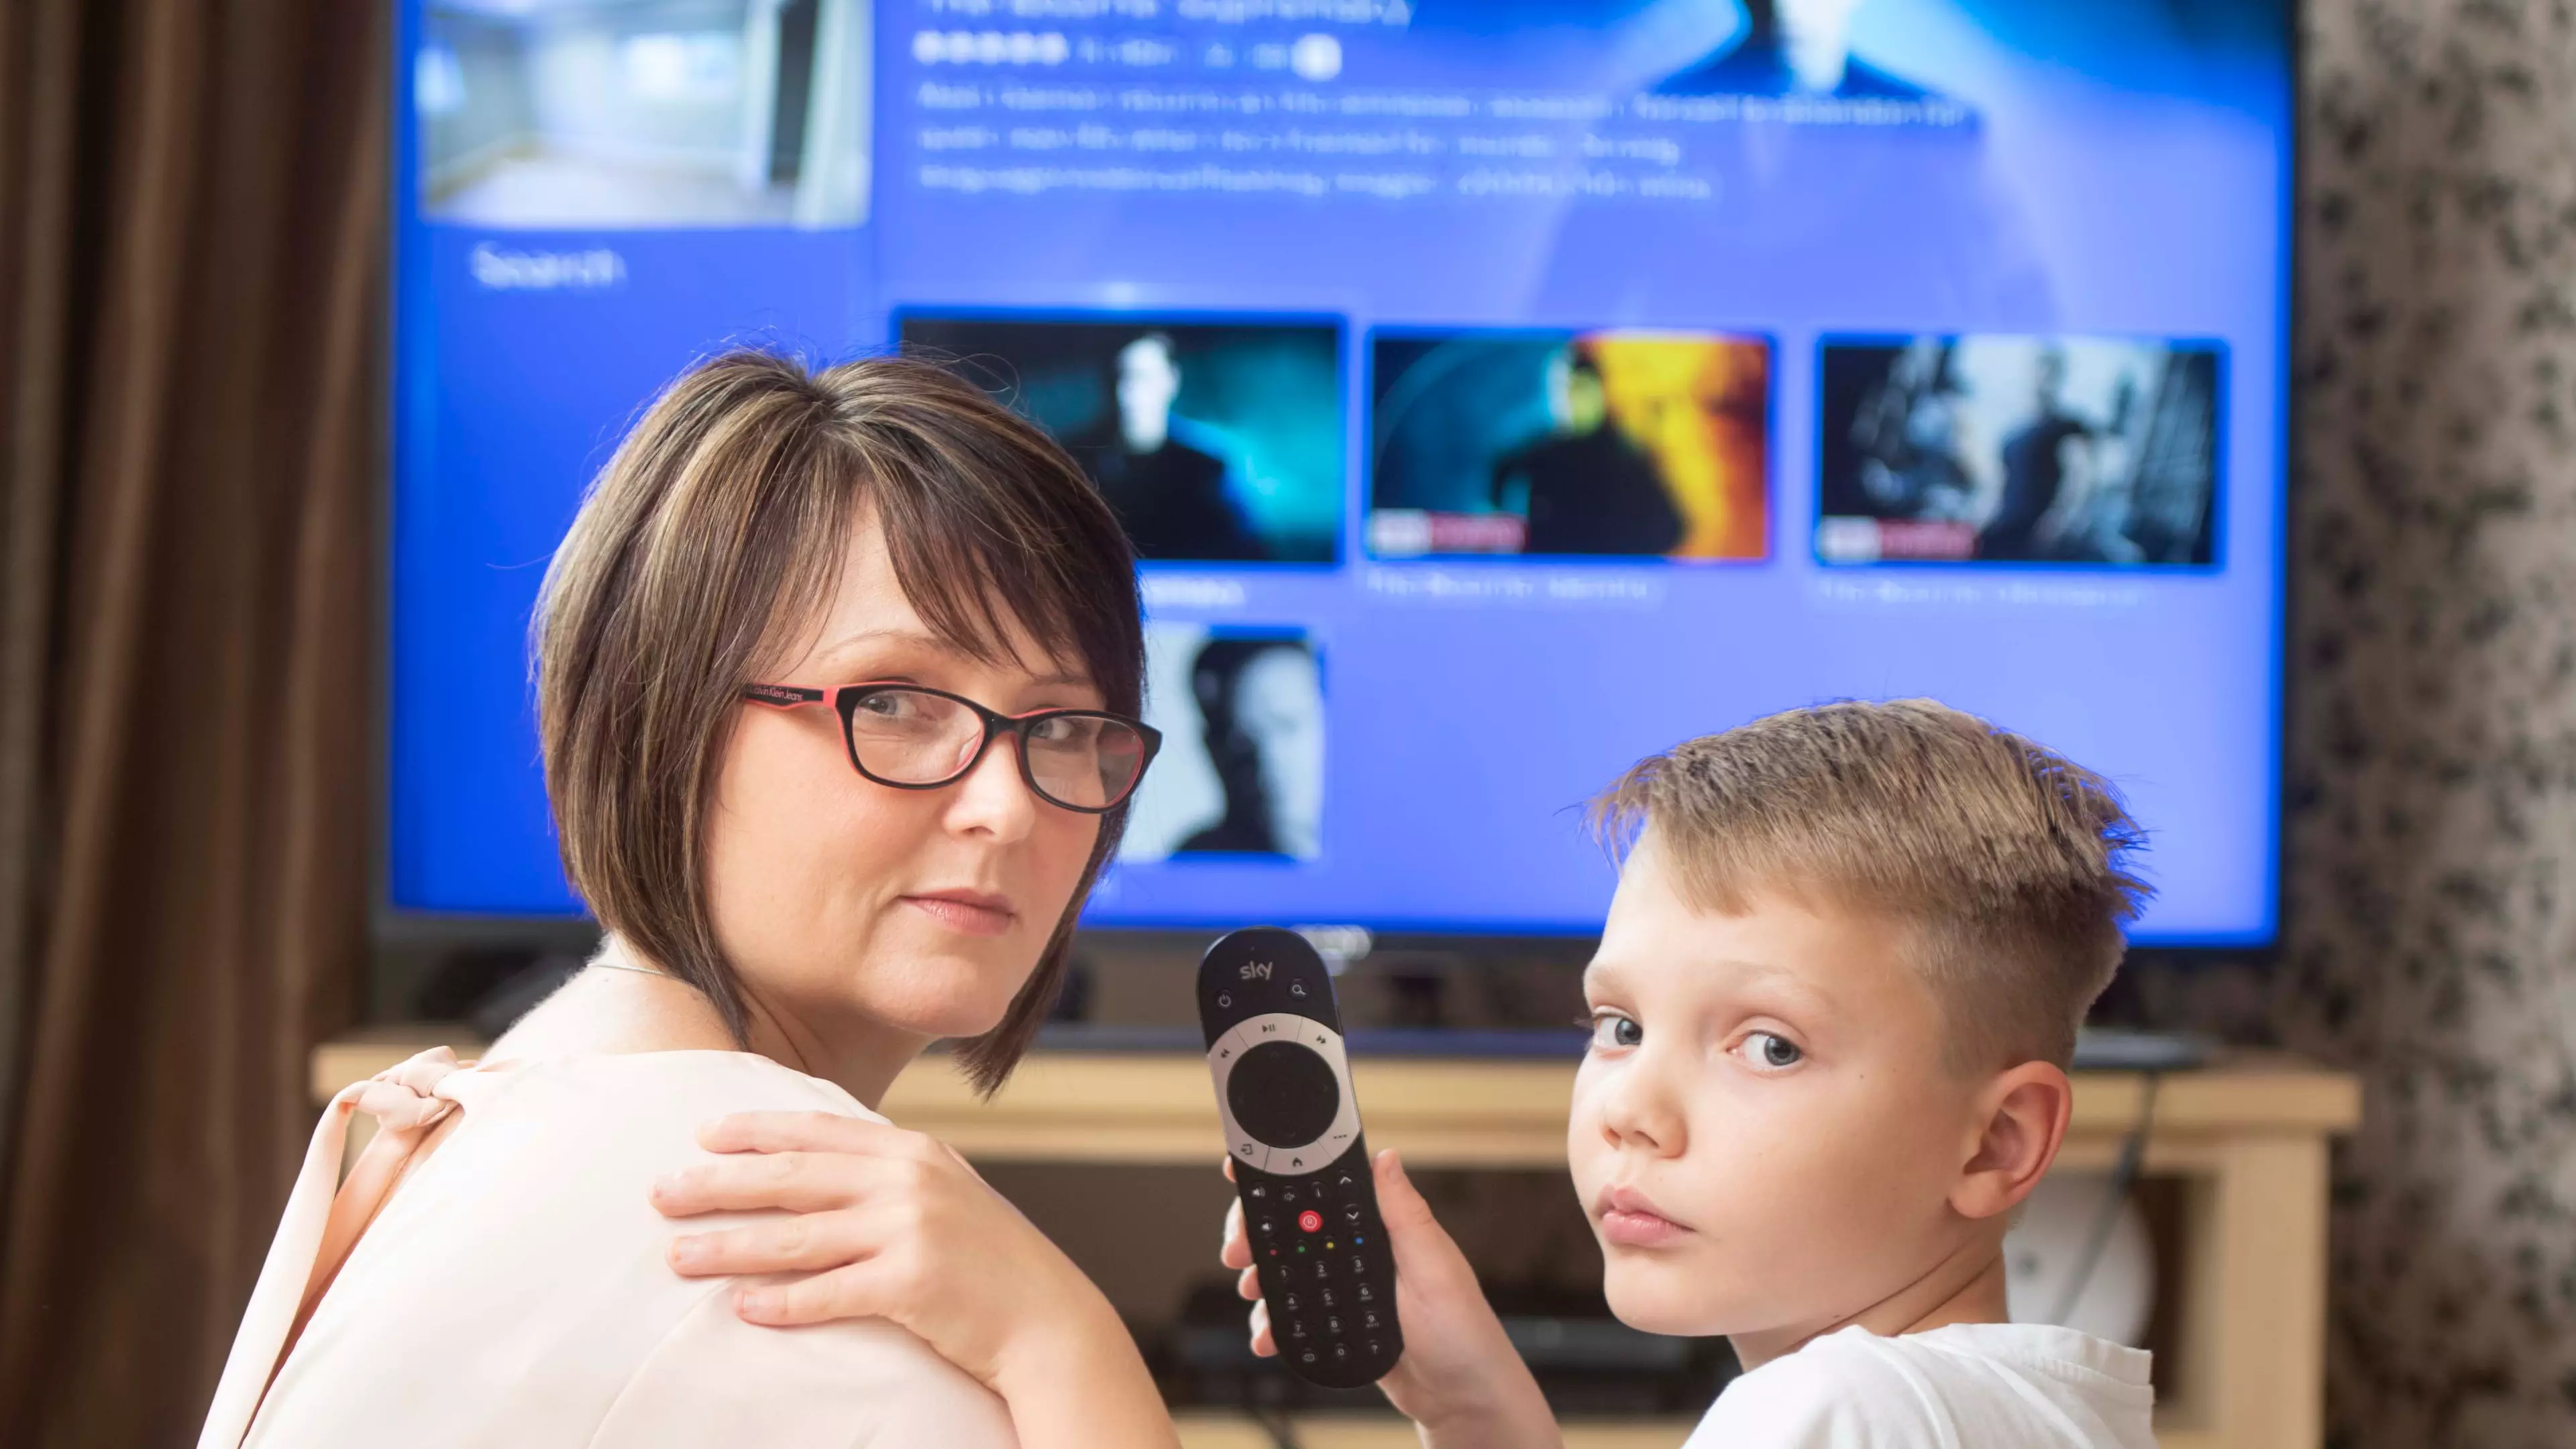 Mum Horrified After Asking Sky Q Remote For 'Bourne Movies' And Being Shown Porn Movies 